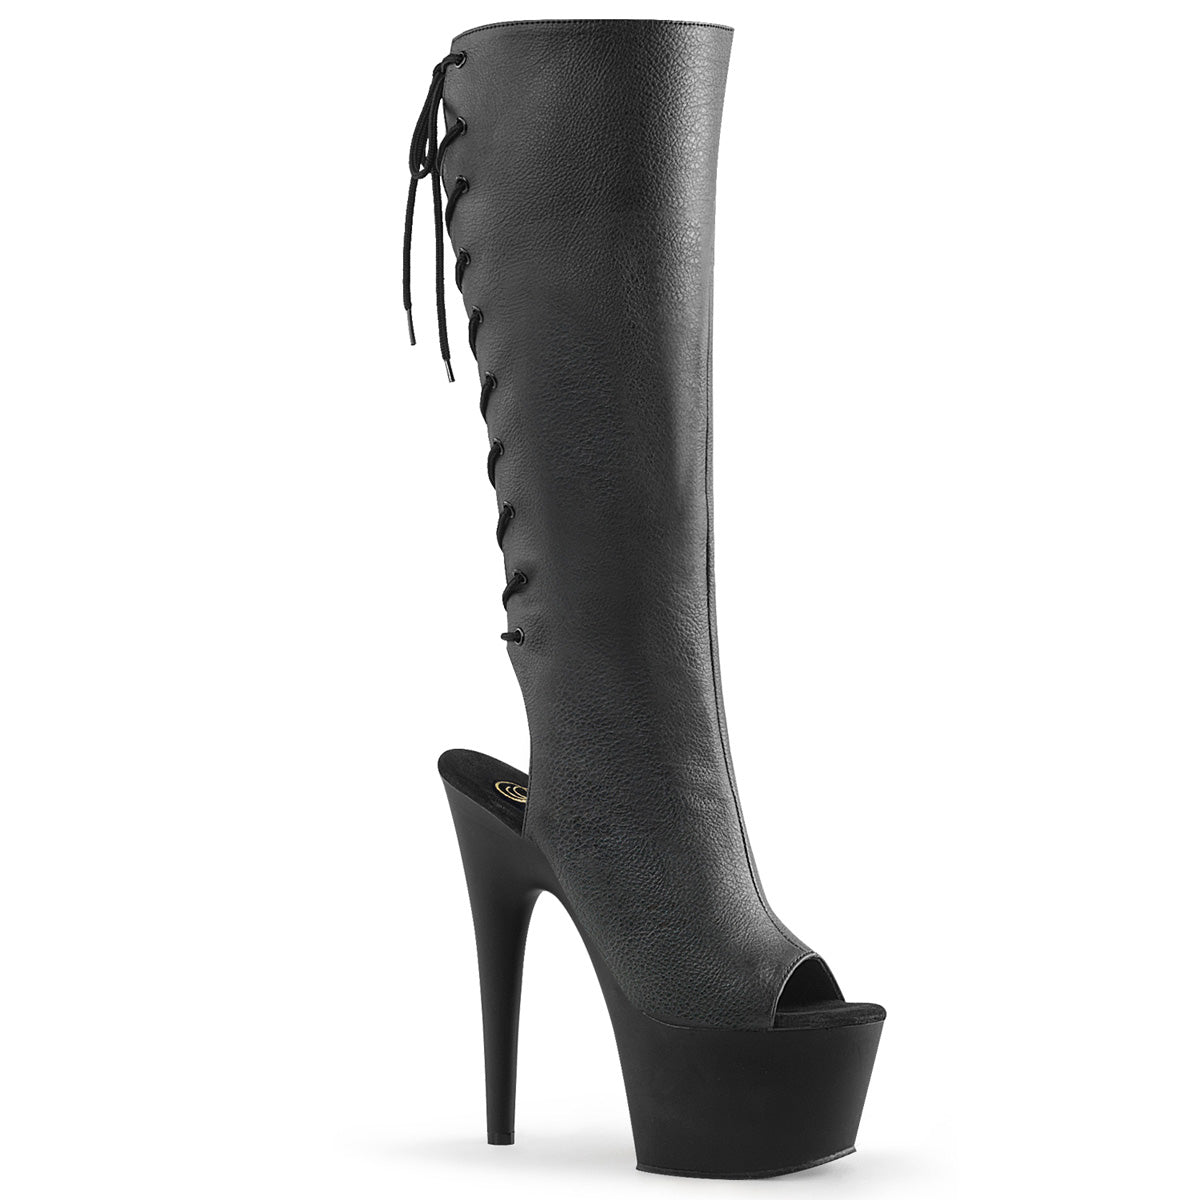 ADORE-2018 Pleasers 7 Inch Heel Black Pole Dancer Knee Highs-Pleaser- Sexy Shoes